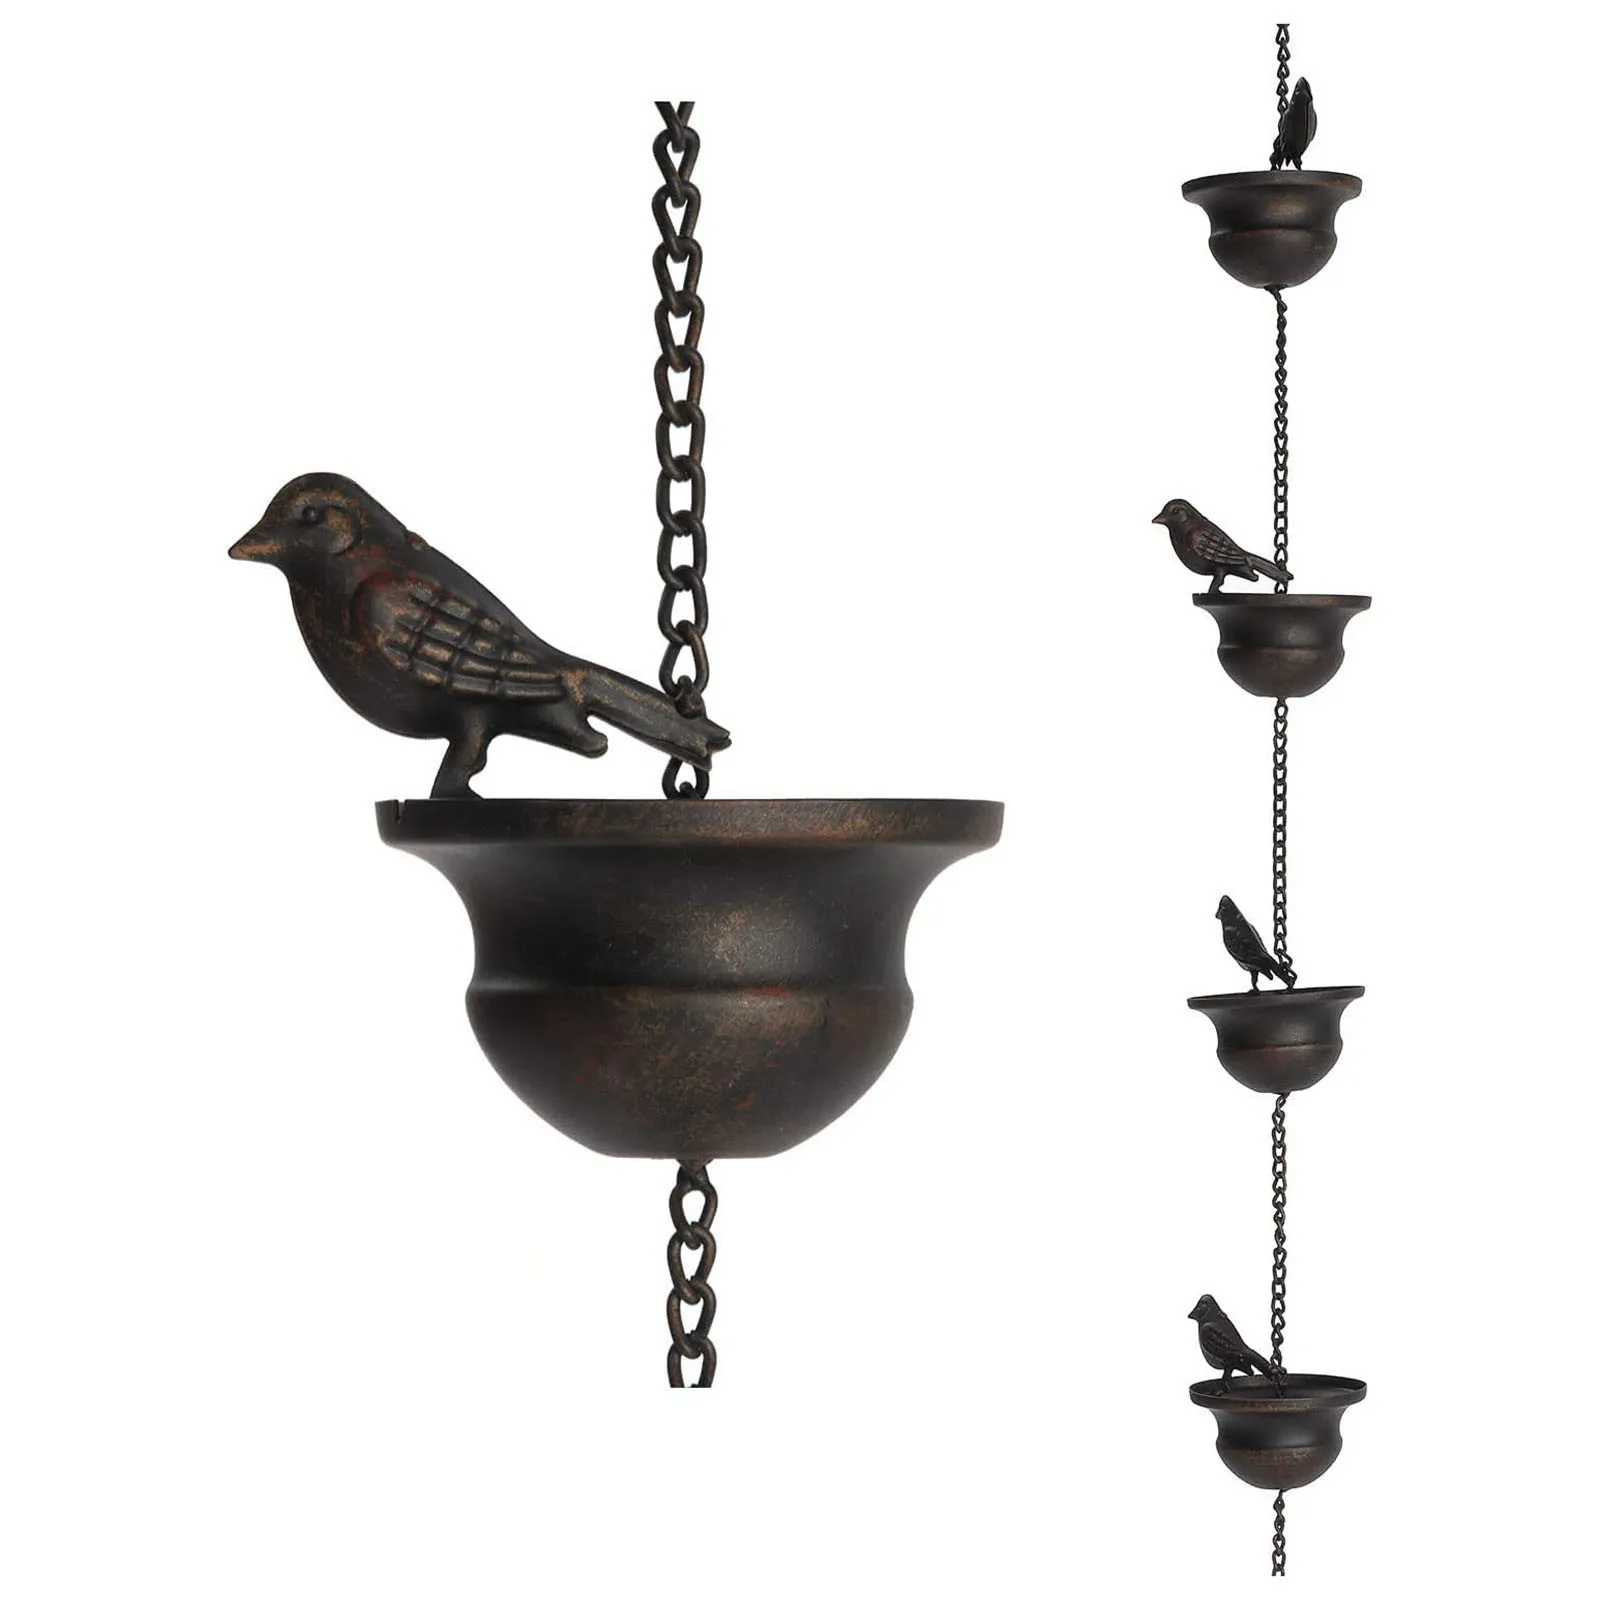 

Mobile Birds On Cups Rain Chain For Outside Rain Chains For Gutters Downspouts Dark Bronze